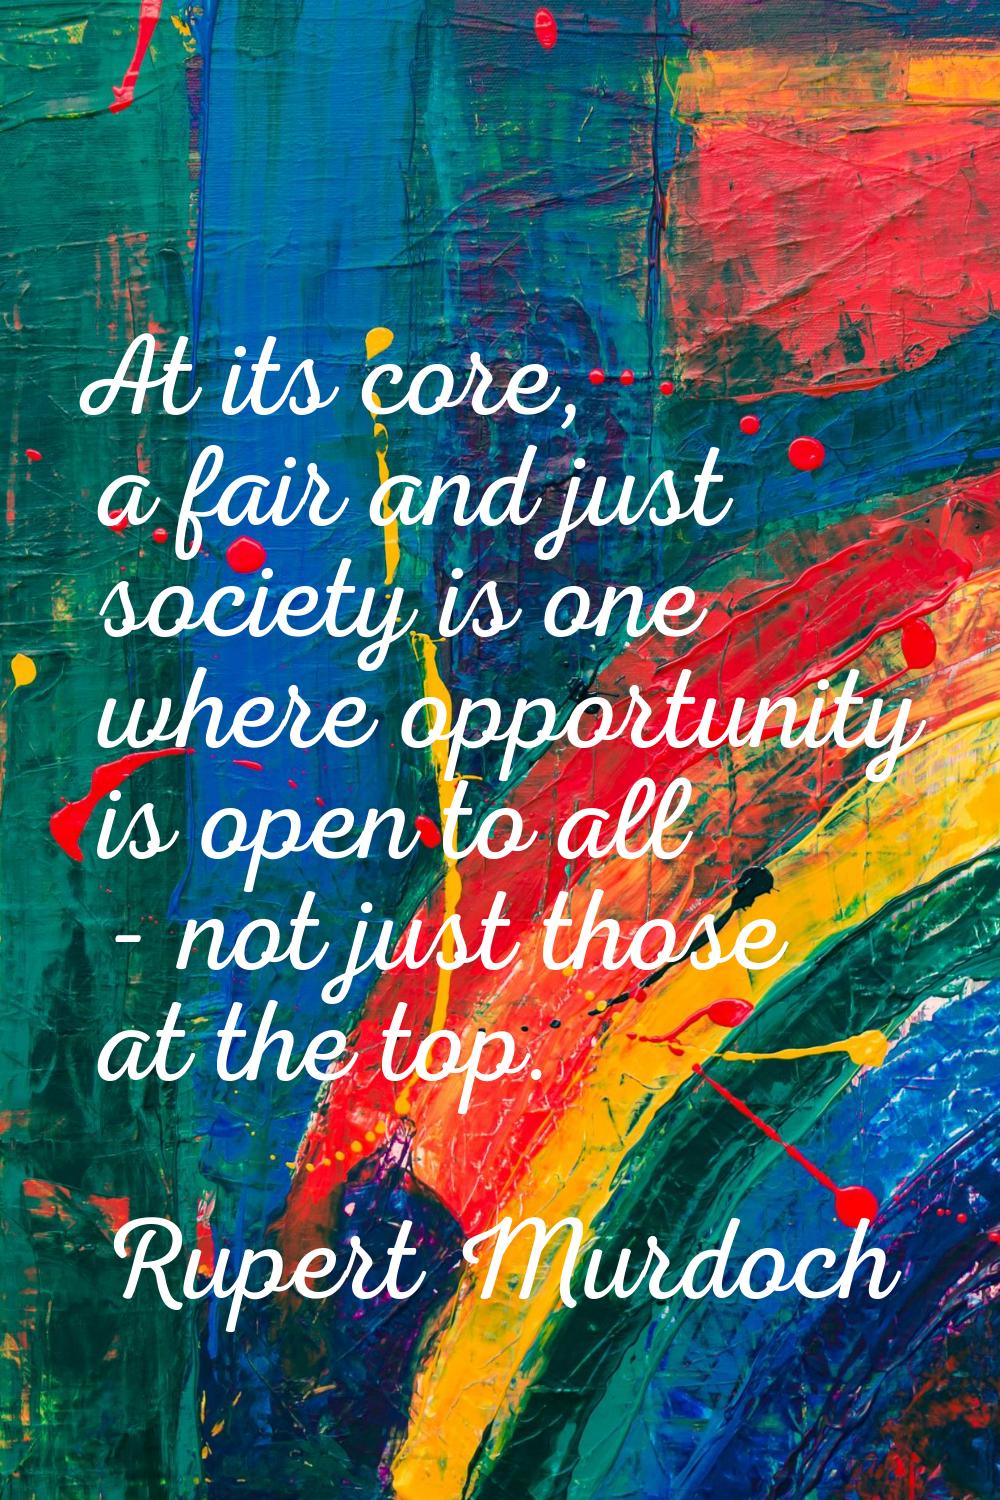 At its core, a fair and just society is one where opportunity is open to all - not just those at th